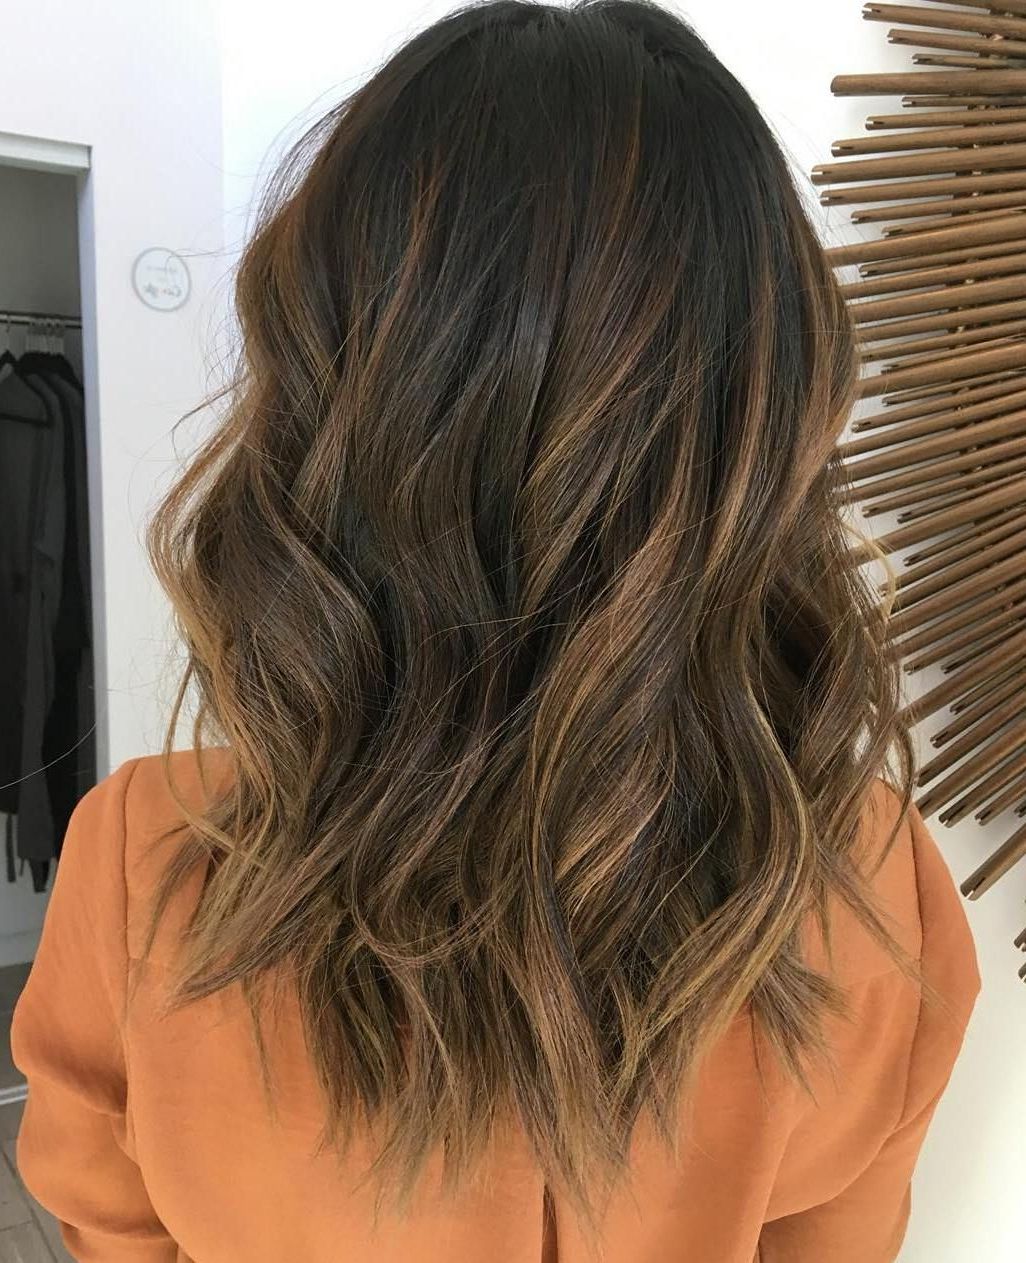 Most Recently Released Highlighted Medium Hairstyles Pertaining To 60 Balayage Hair Color Ideas With Blonde, Brown, Caramel And Red (View 1 of 20)